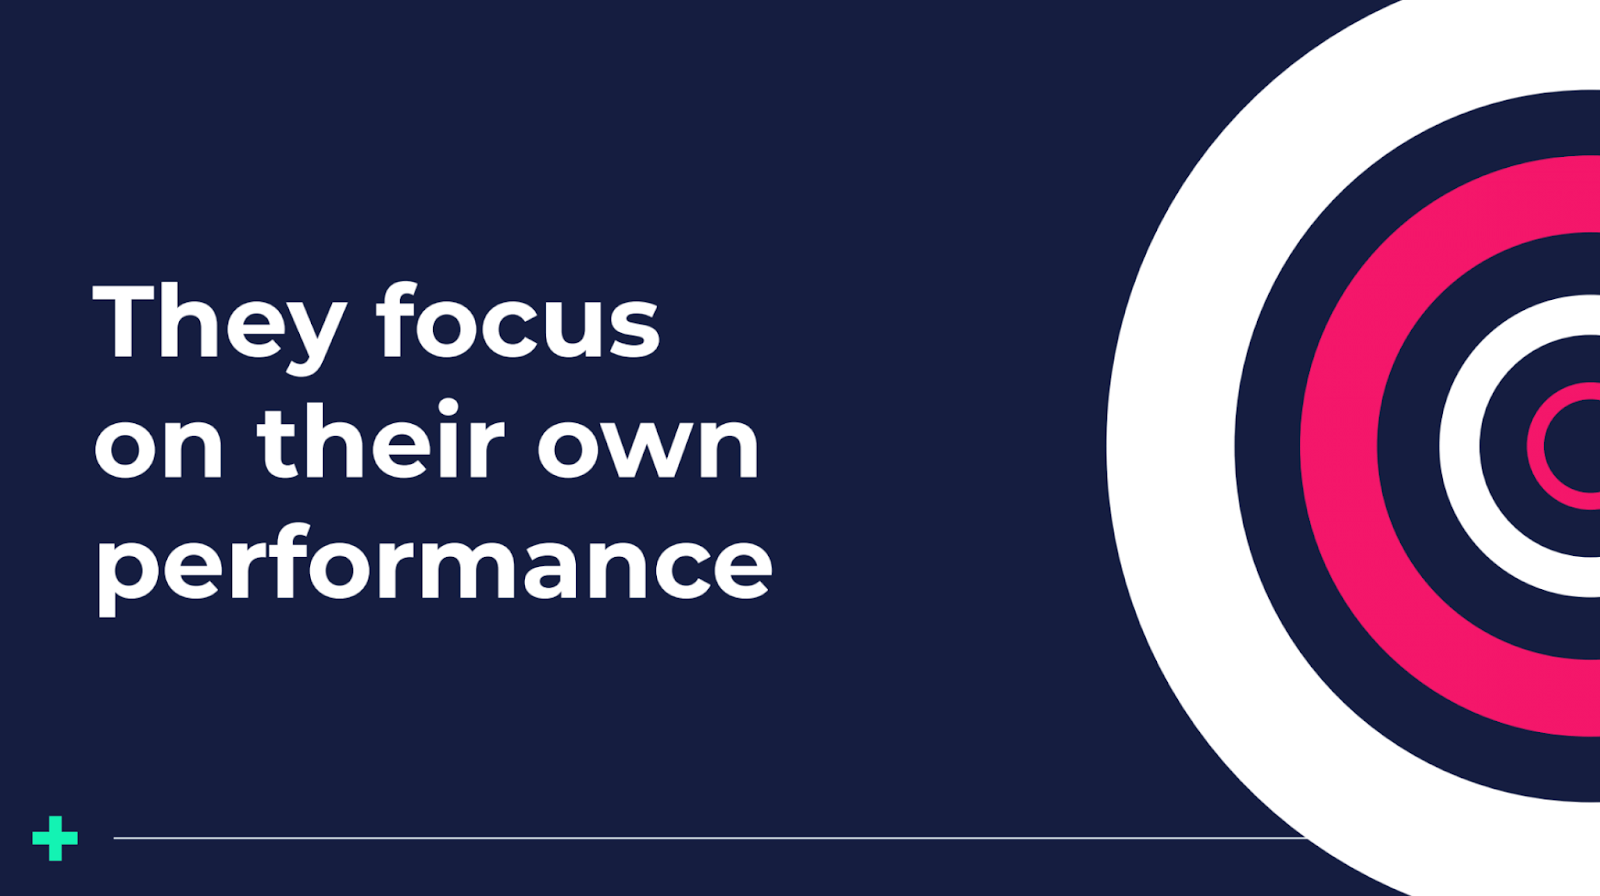 They focus on their own performance